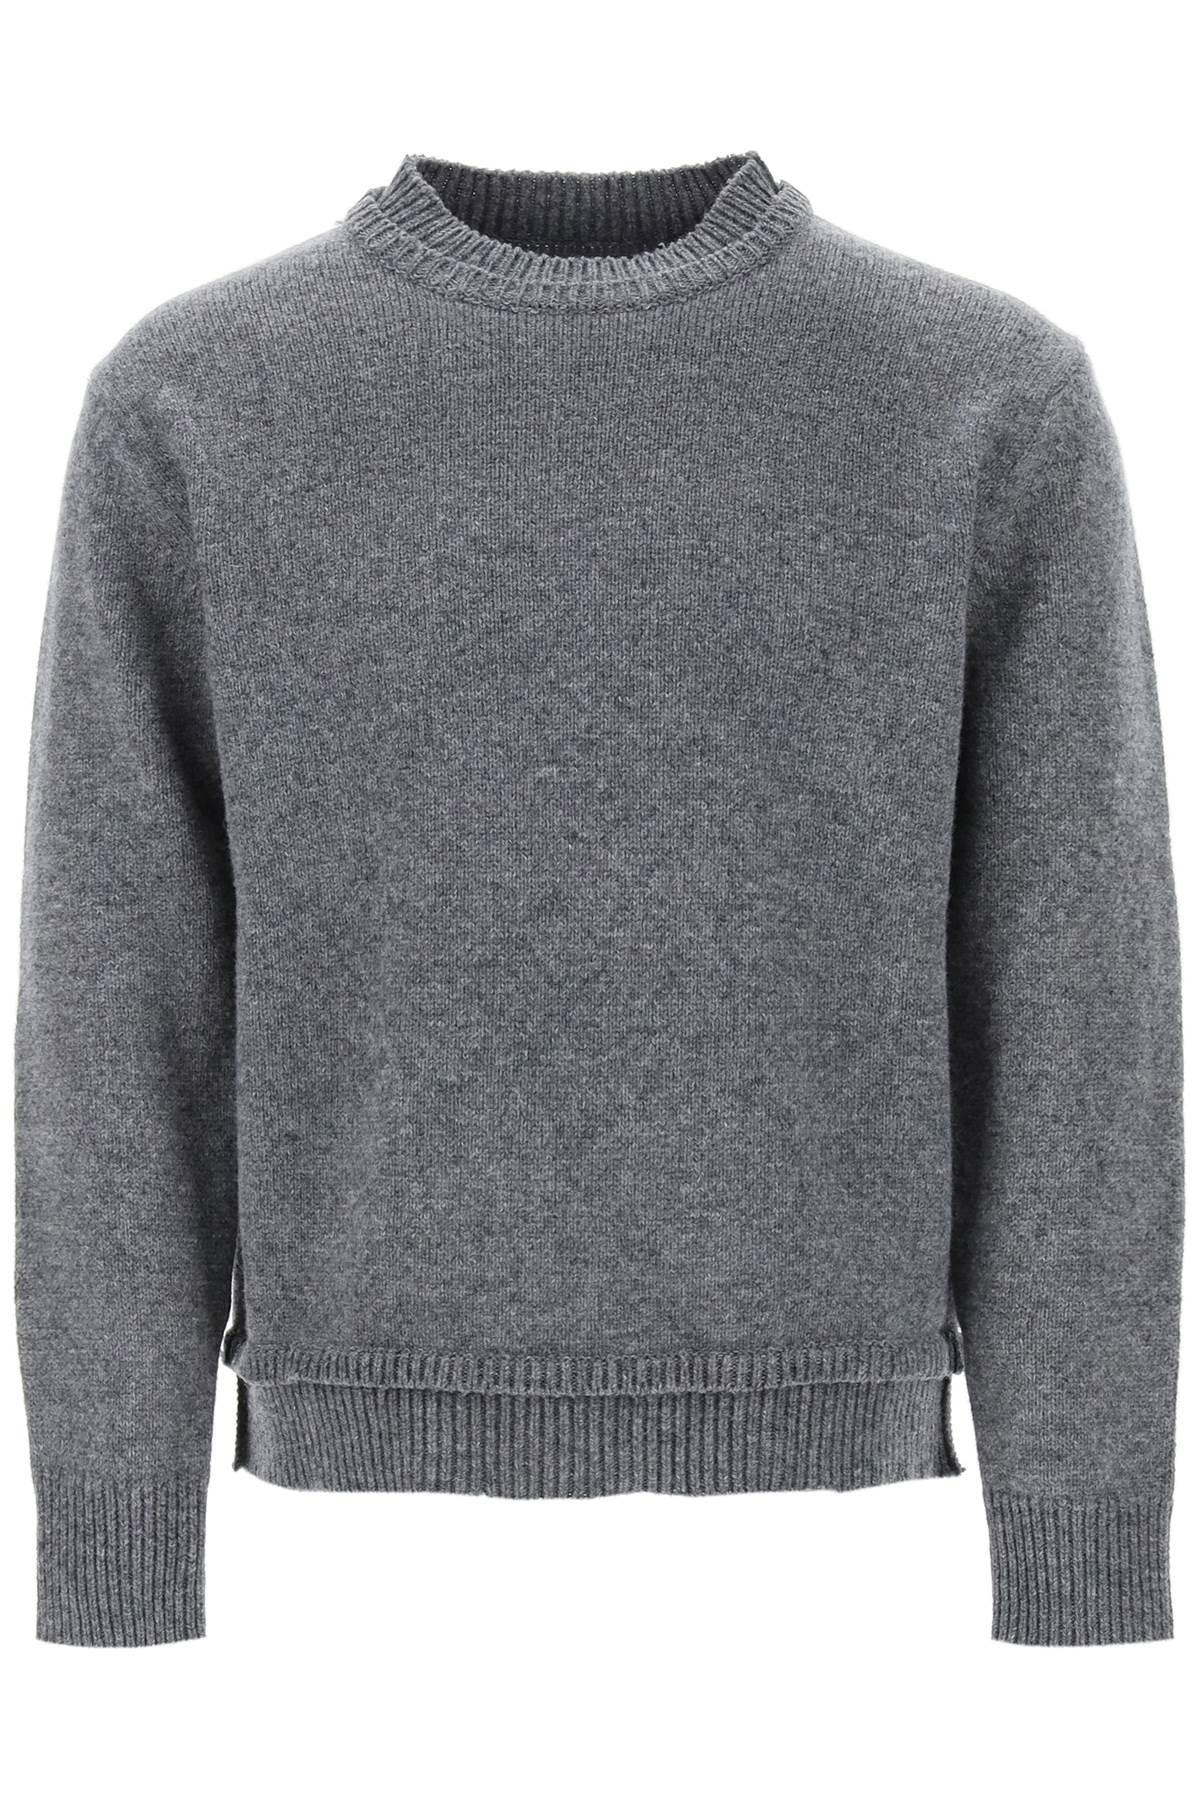 CREW NECK SWEATER WITH ELBOW PATCHES - 1